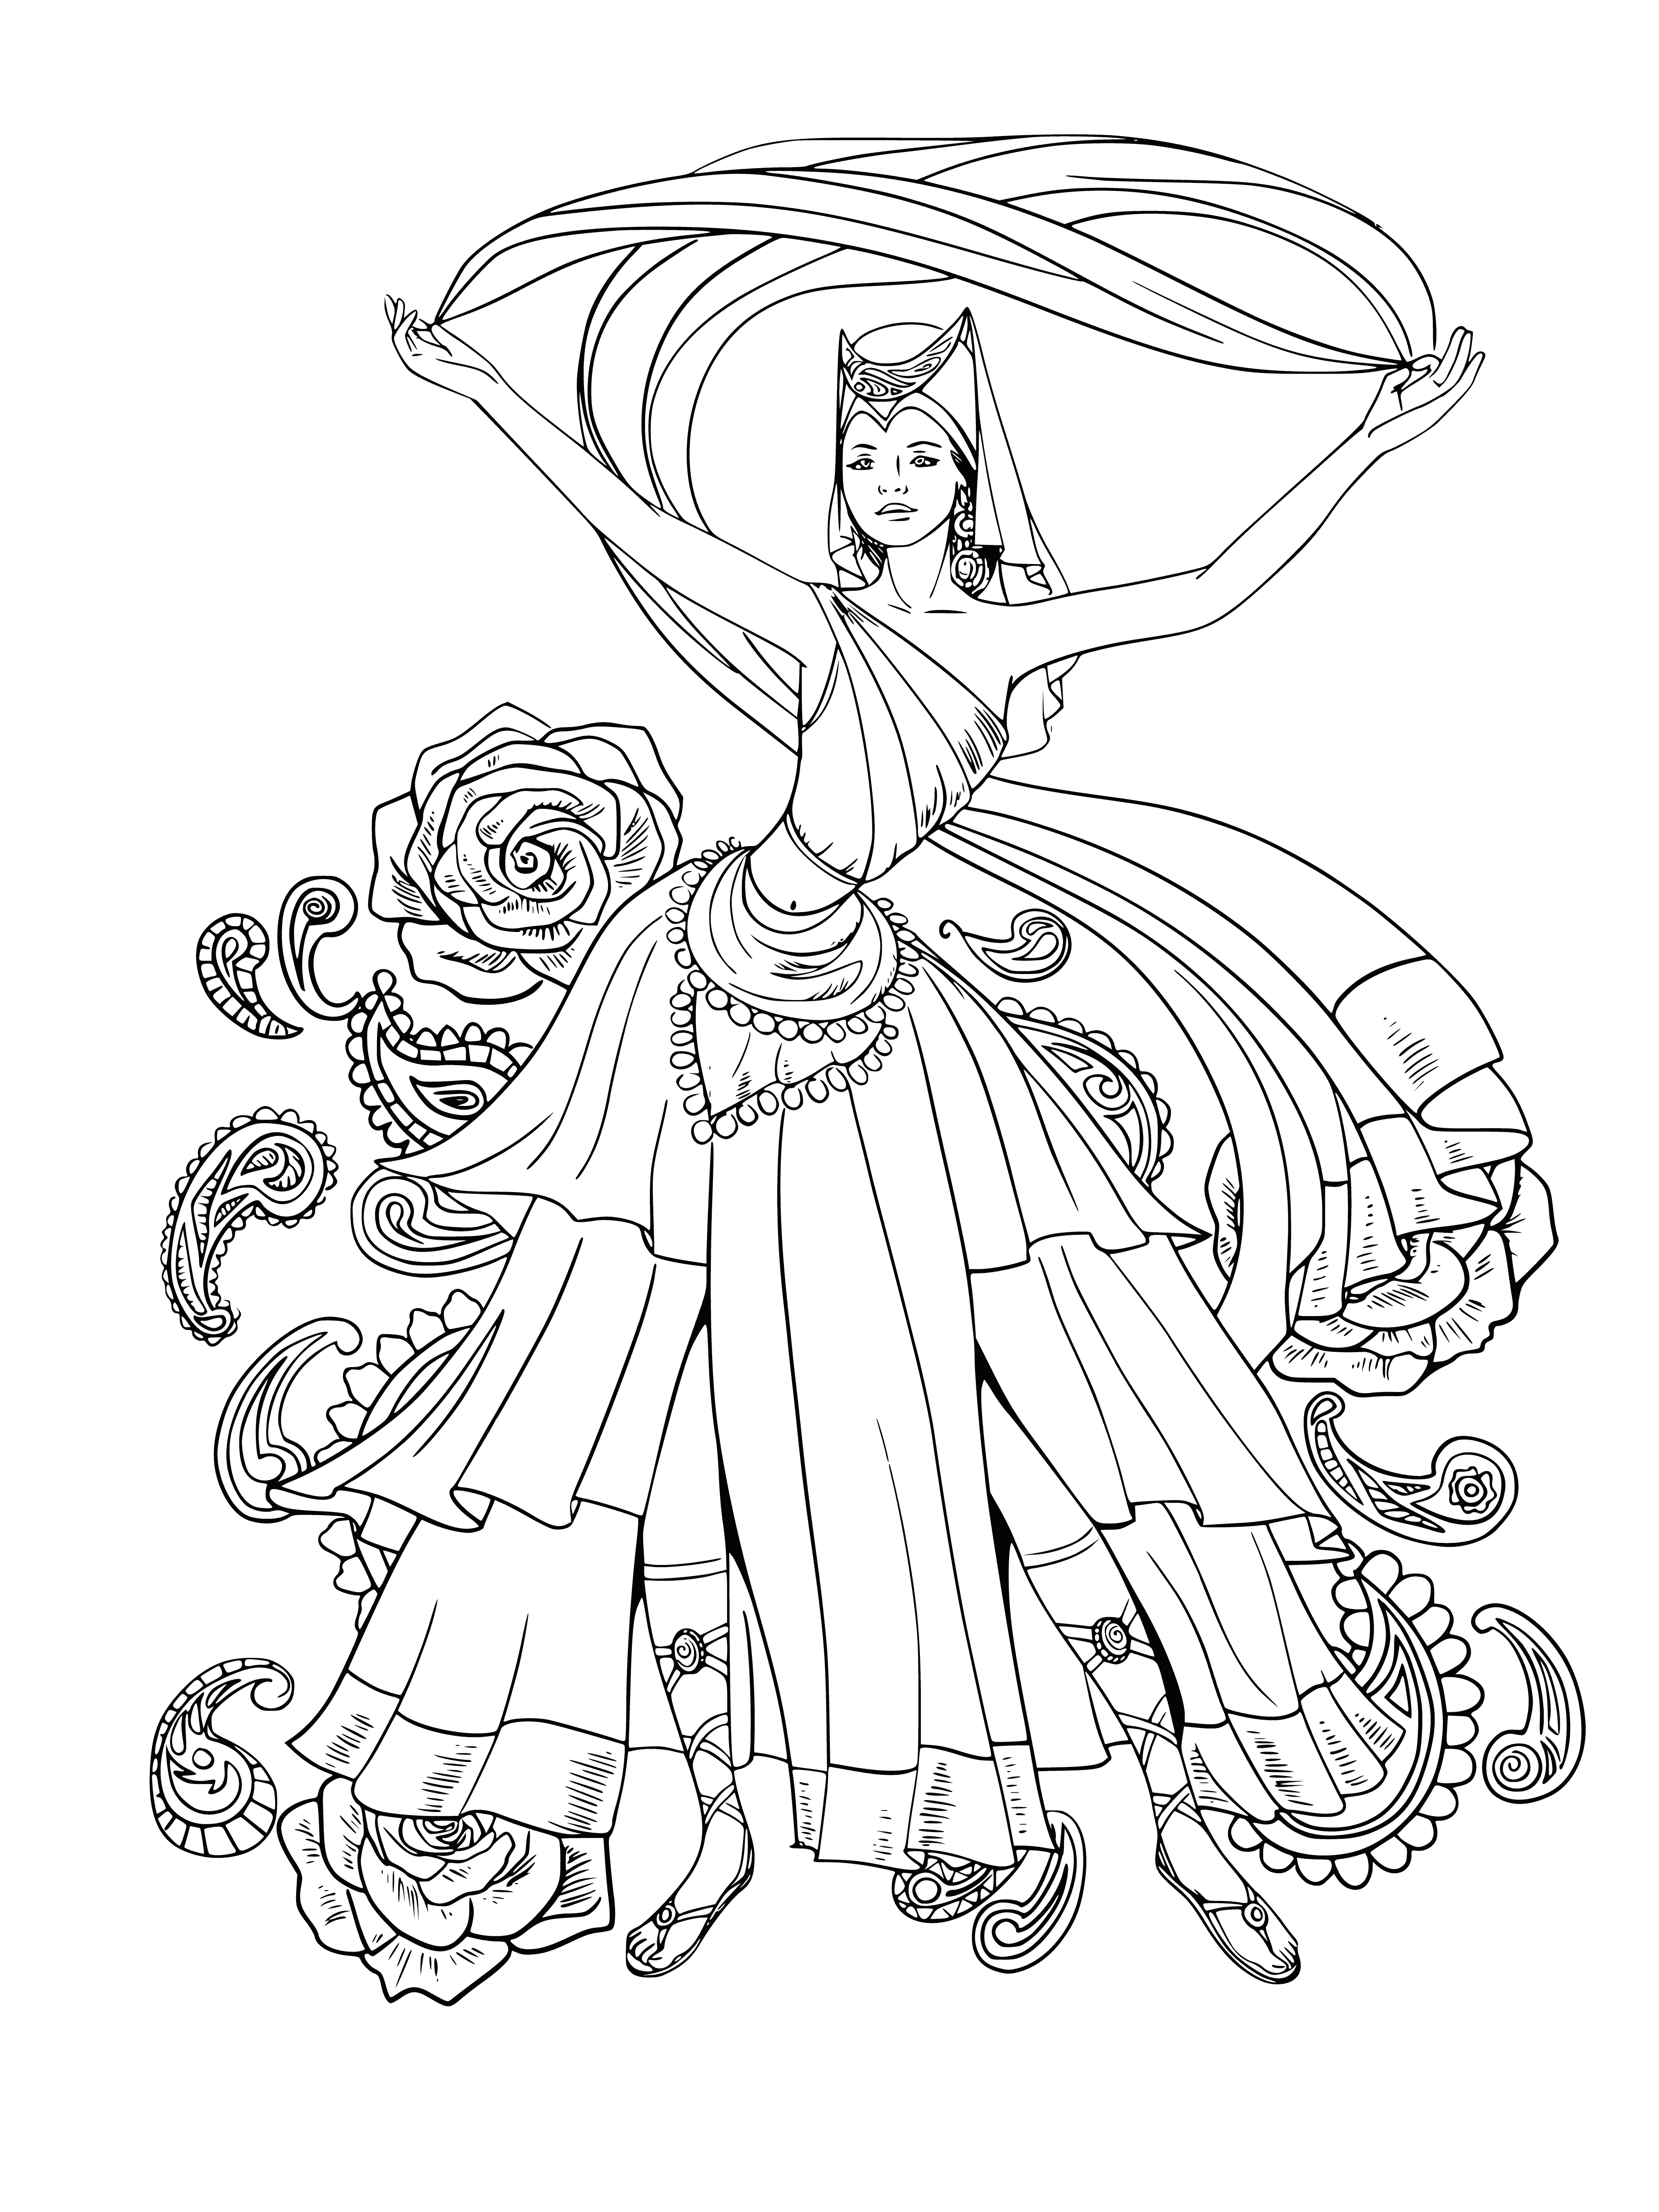 coloring page: Young woman gracefully practicing a dance move, wearing a light swirl of fabric & her hair flowing around her face, confidently showing enjoyment.